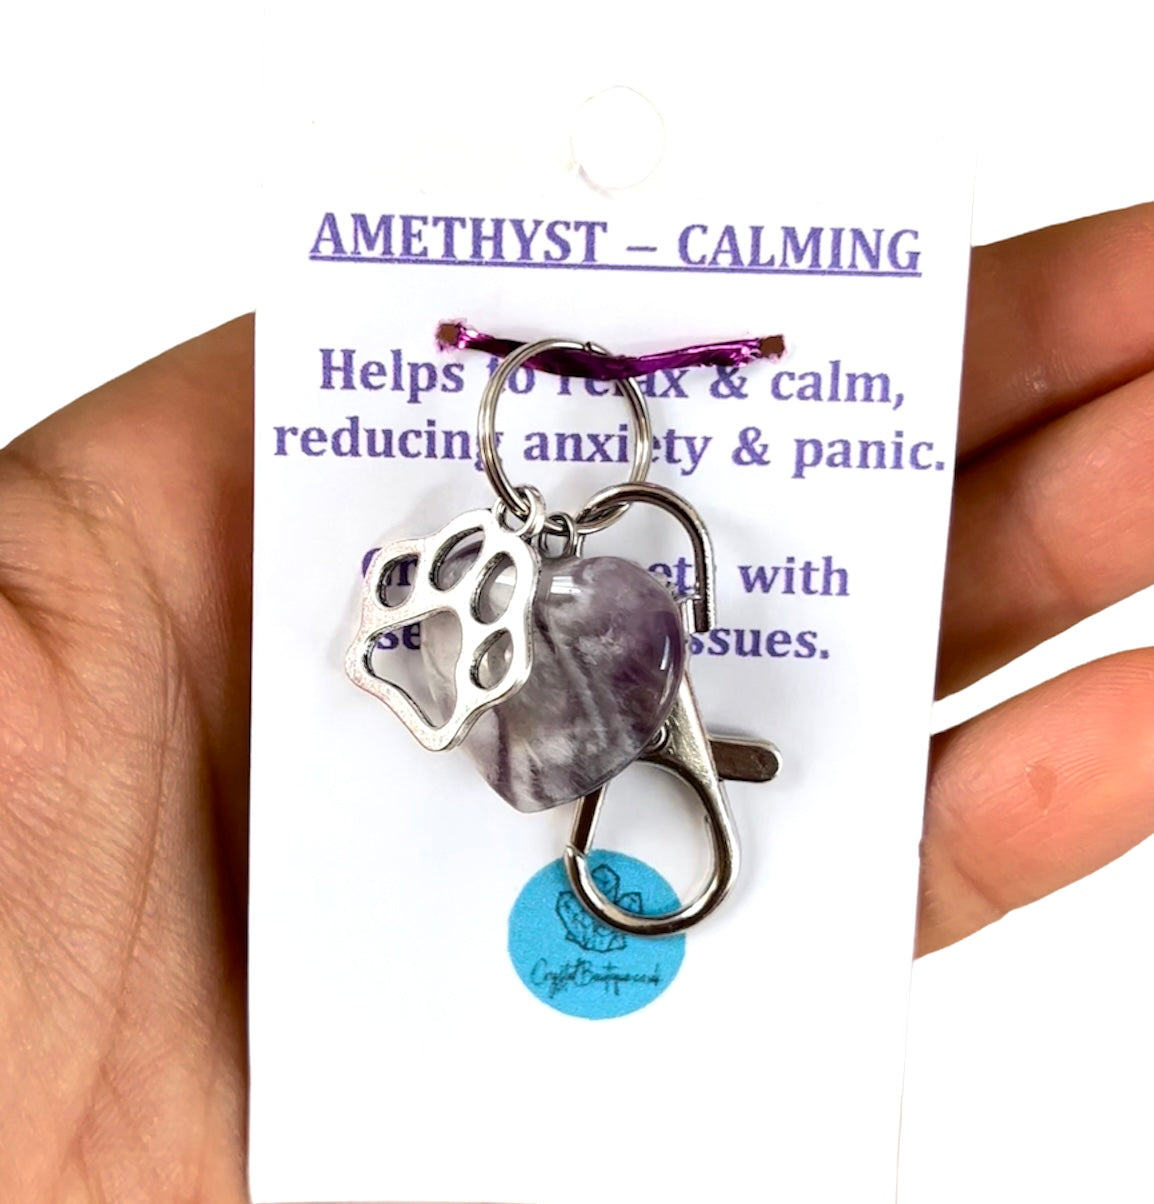 Amethyst Crystal Healing Gemstone Collar Charms for Pets